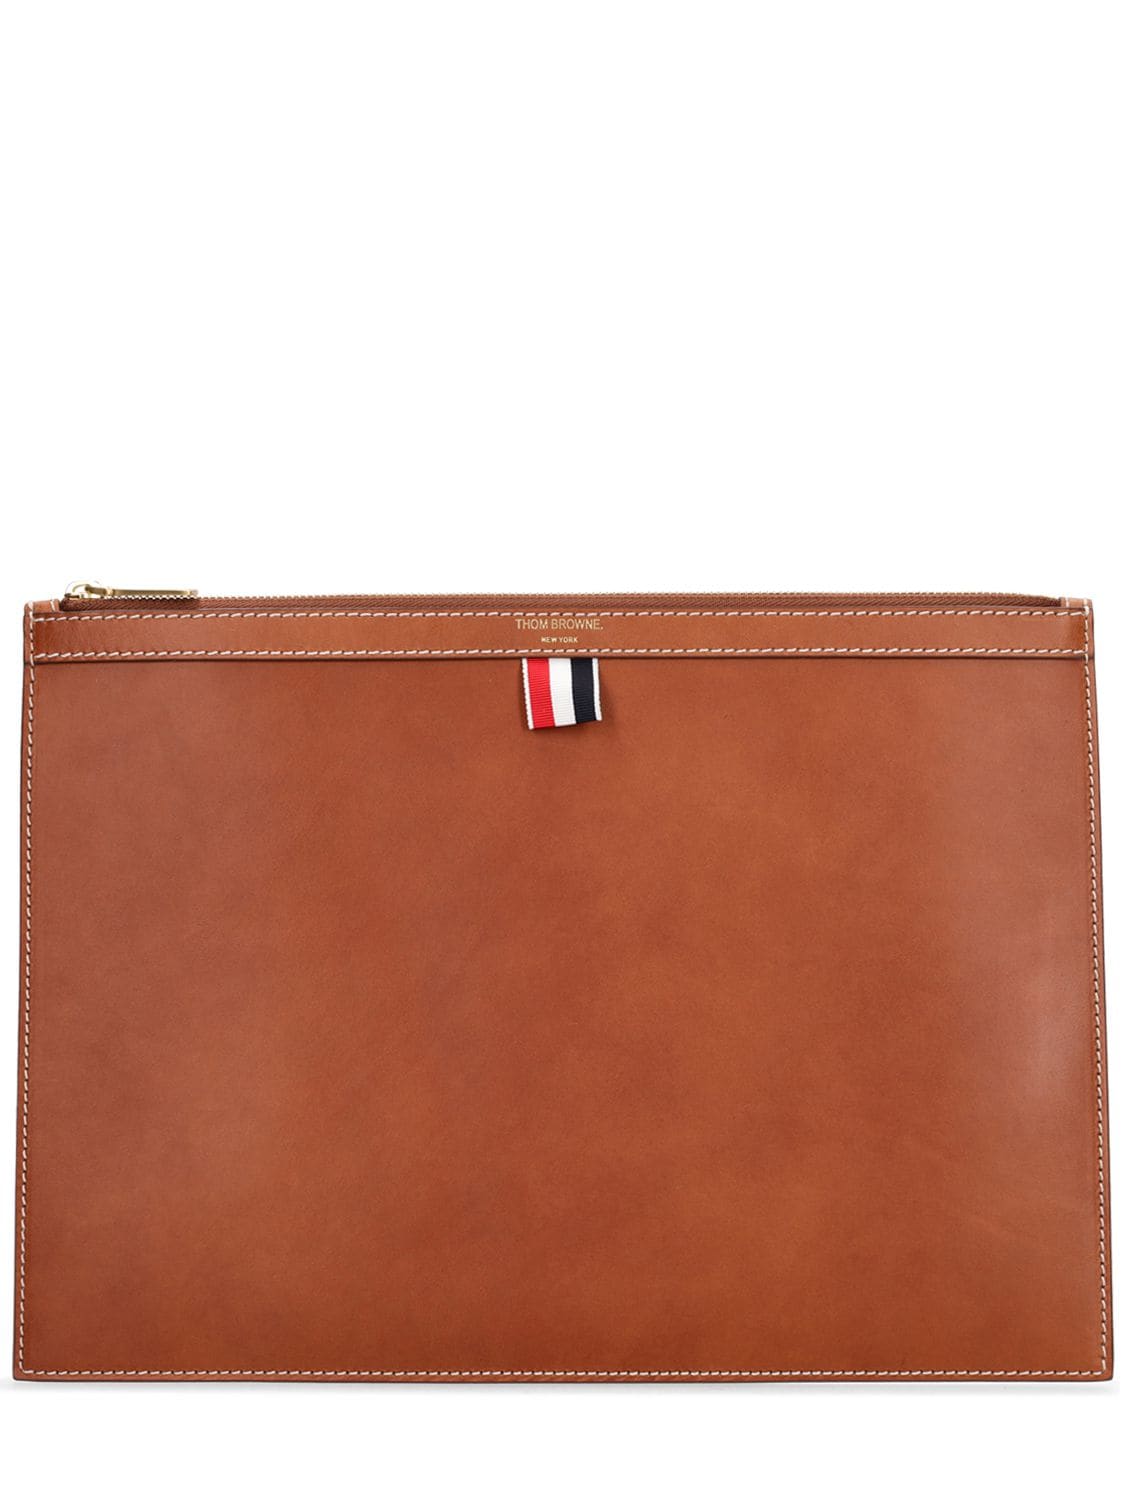 Thom Browne 4-bar Tab Document Holder In Natural